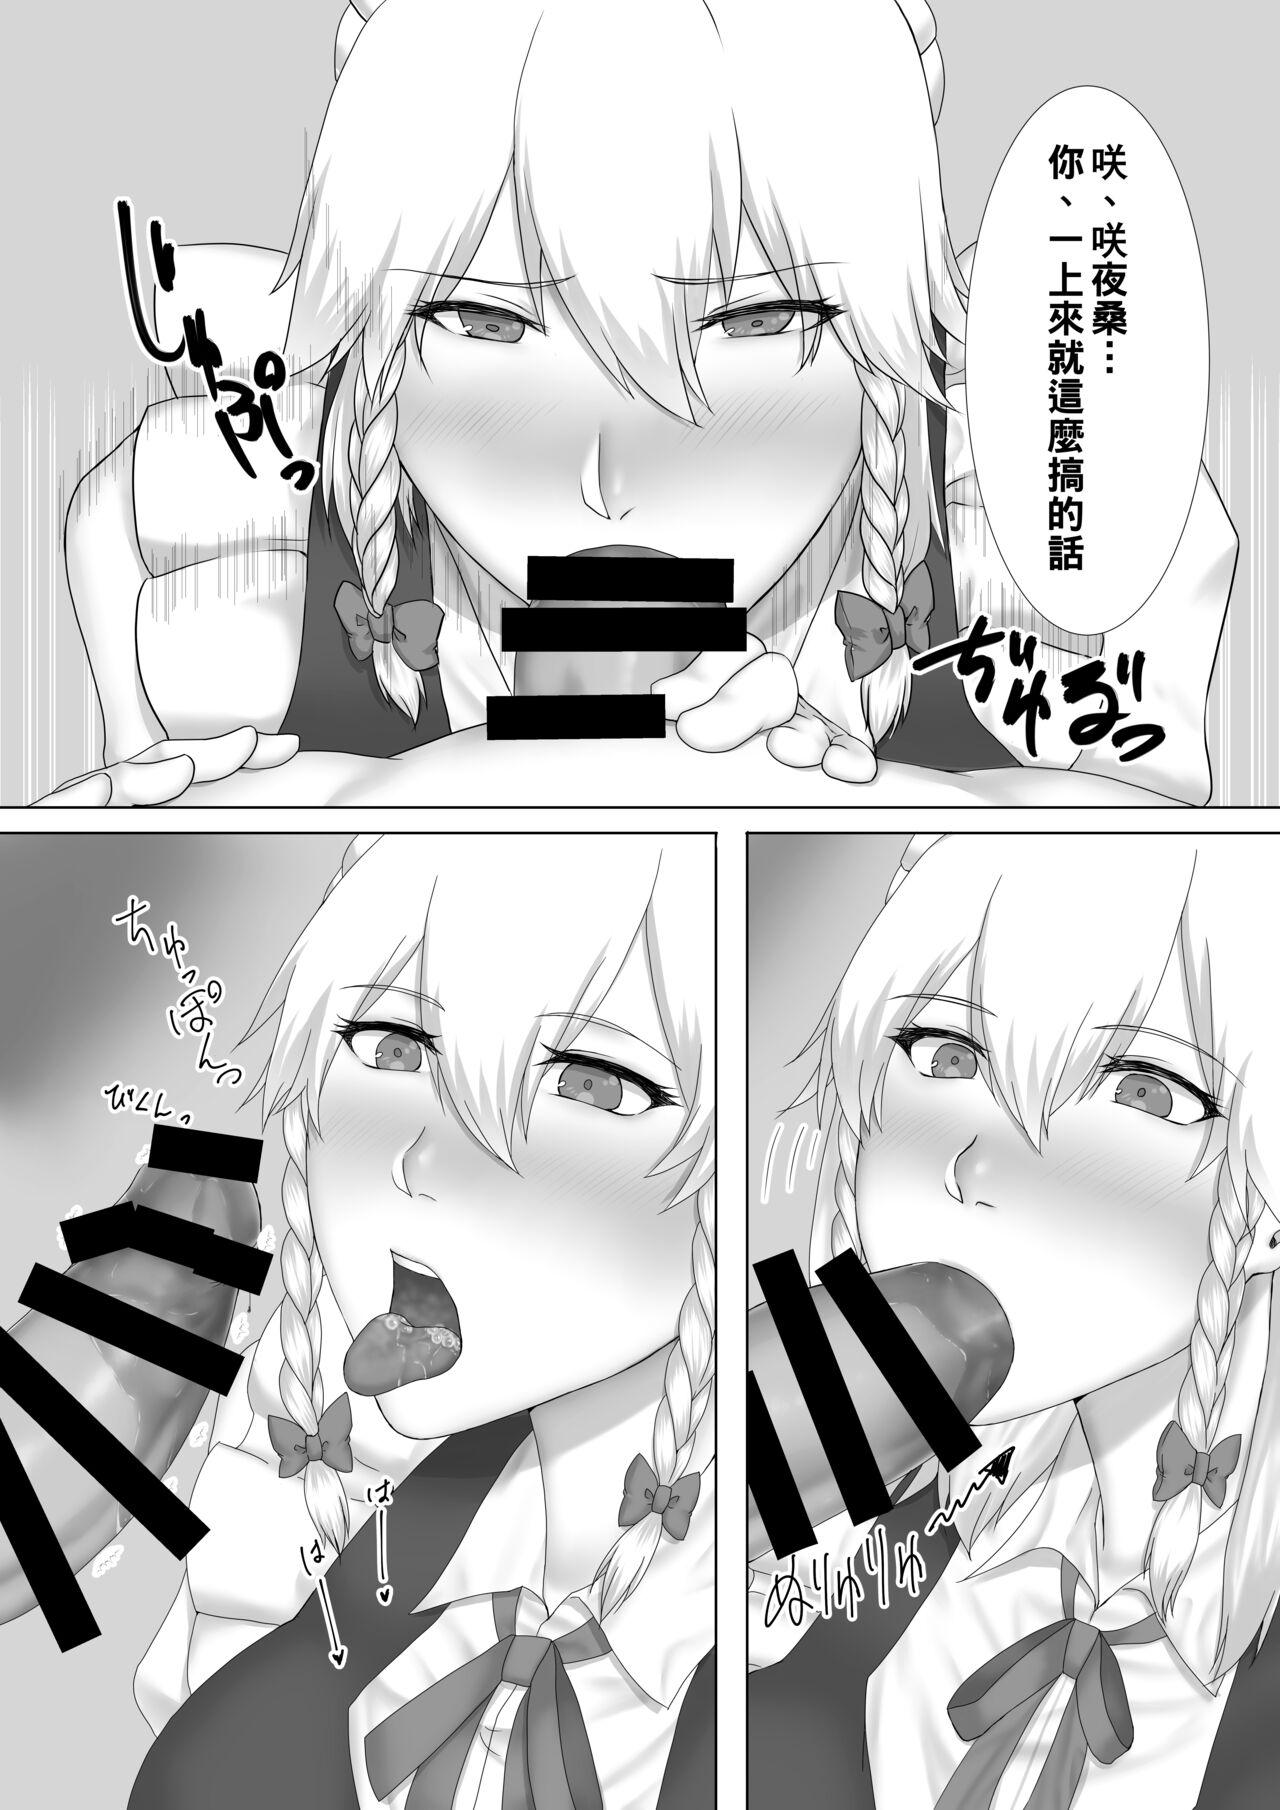 Spycam [糖質過多ぱると (只野めざし)] 咲夜さんとセフレになる本 (東方Project)（Chinese） - Touhou project Gay 3some - Page 6